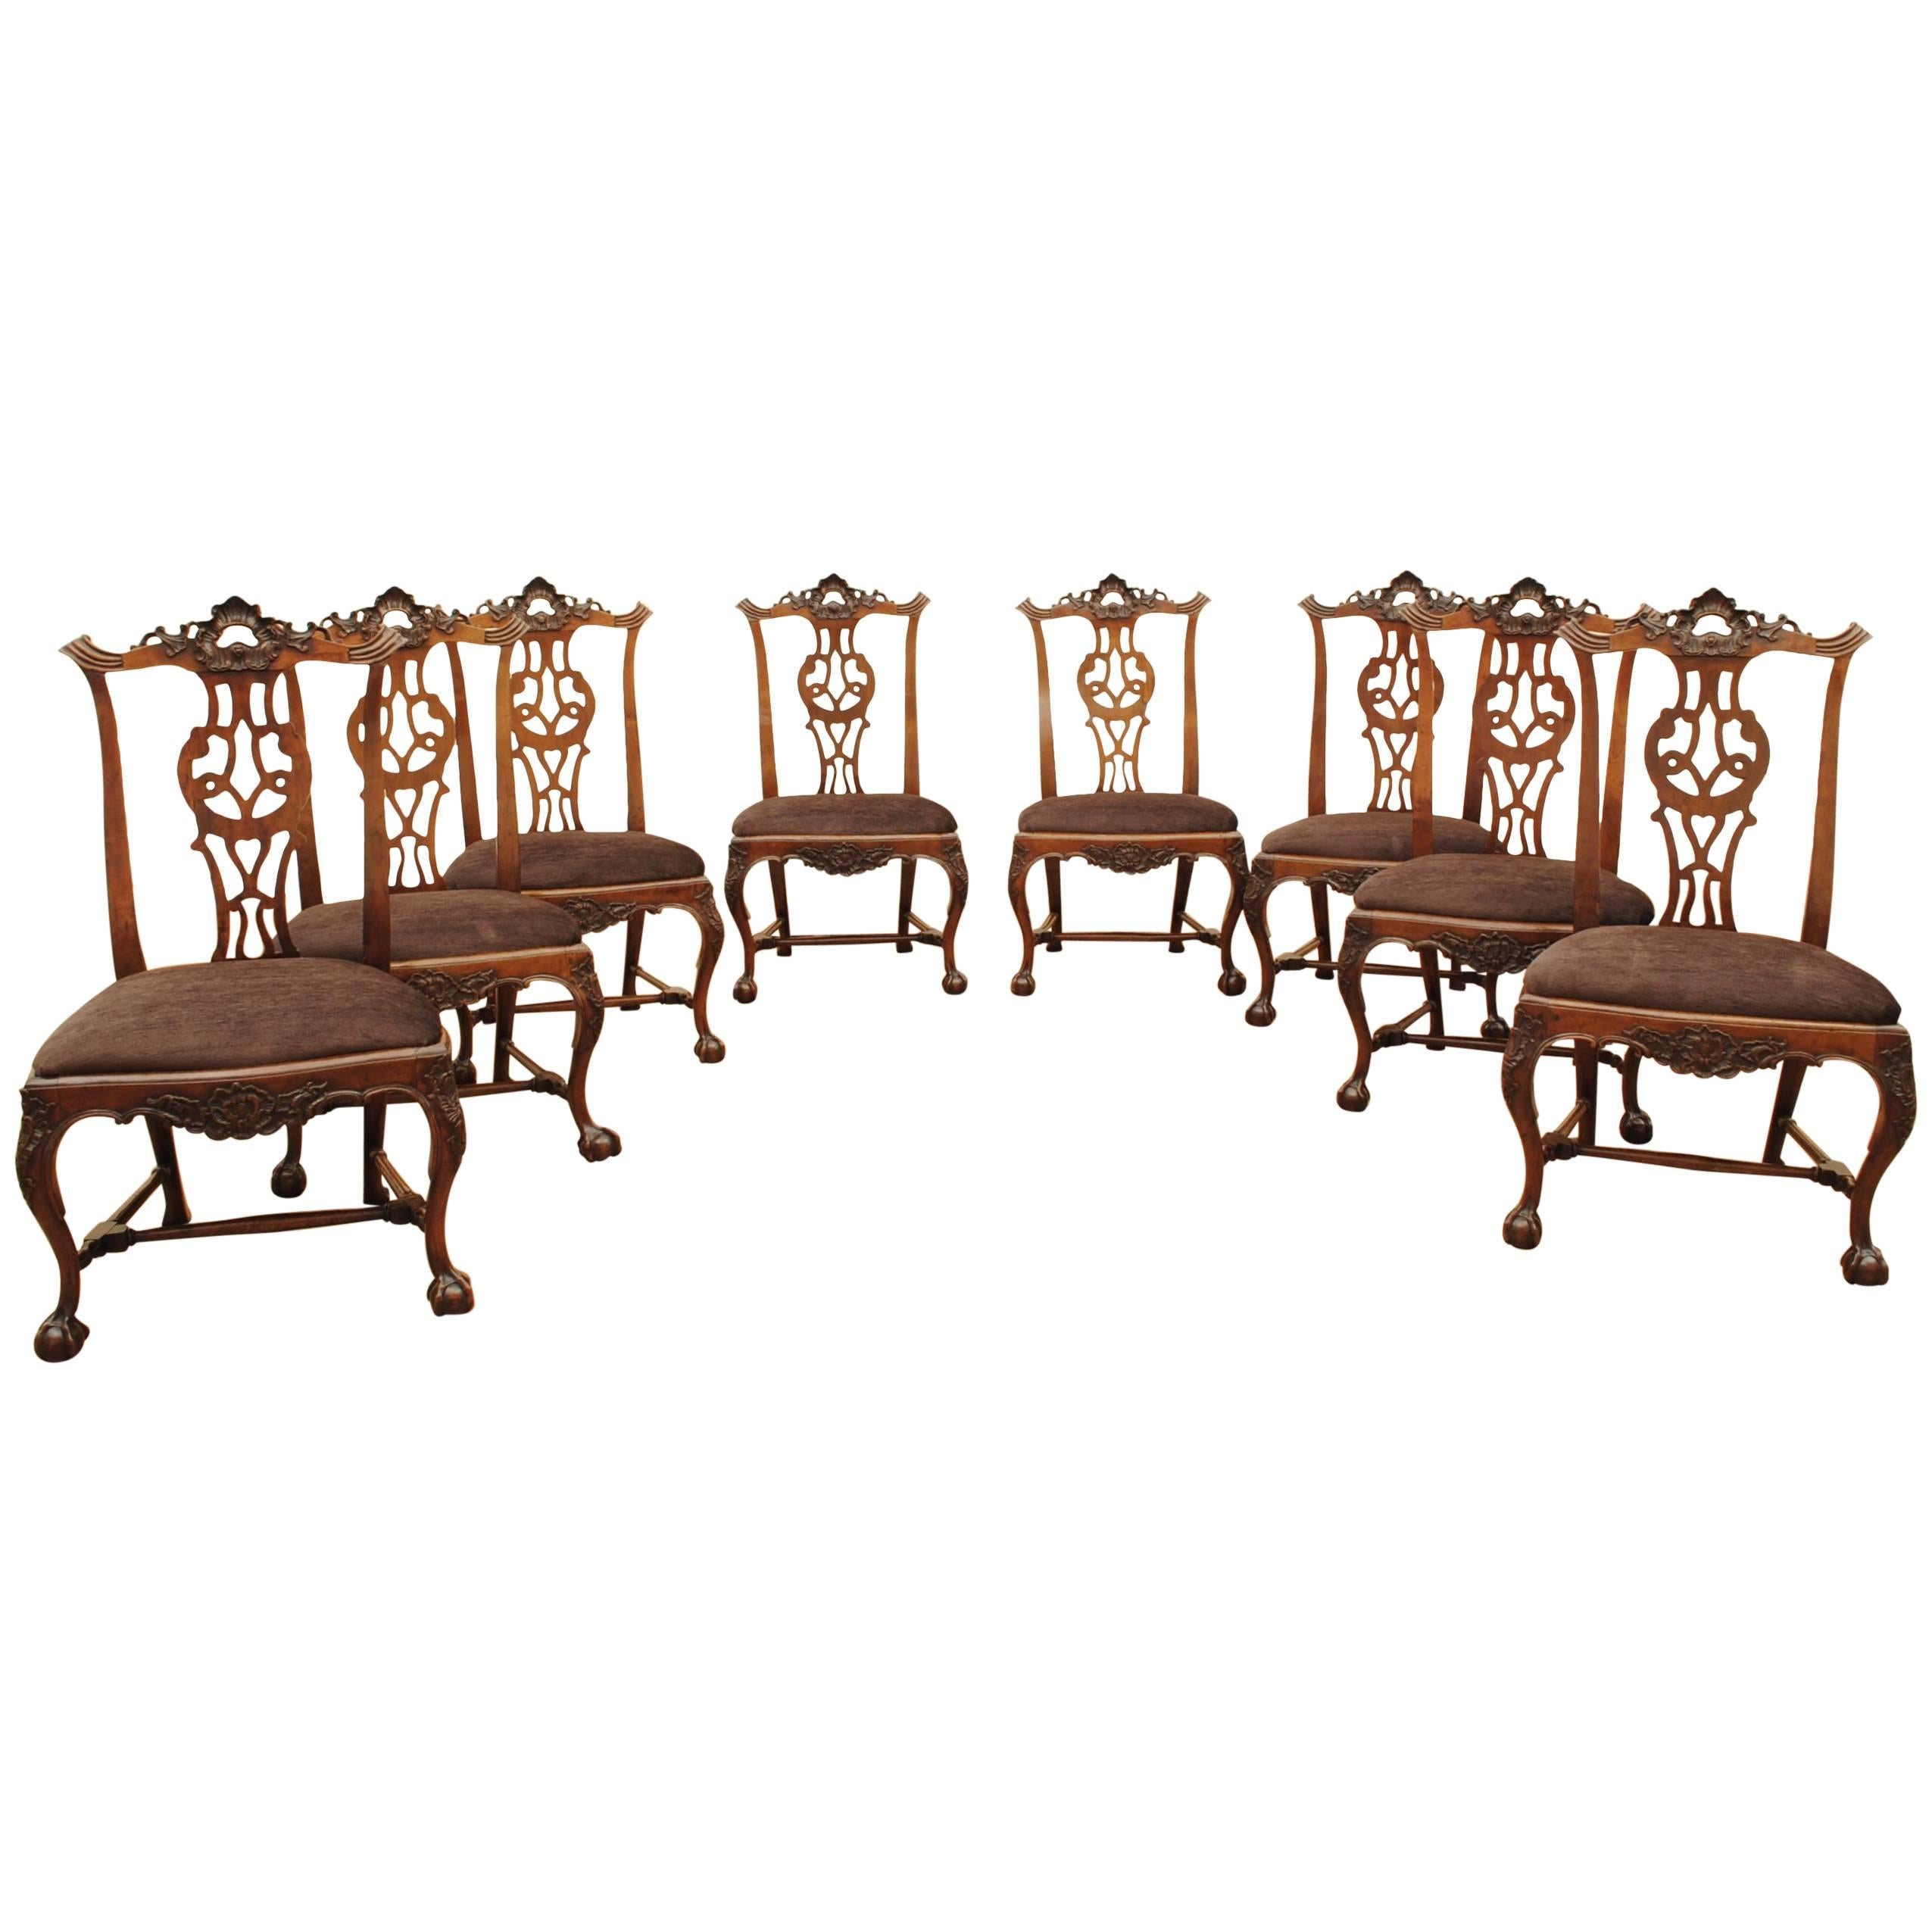 Set of Eight Portuguese Walnut Chippendale Influenced 18th Century Chairs